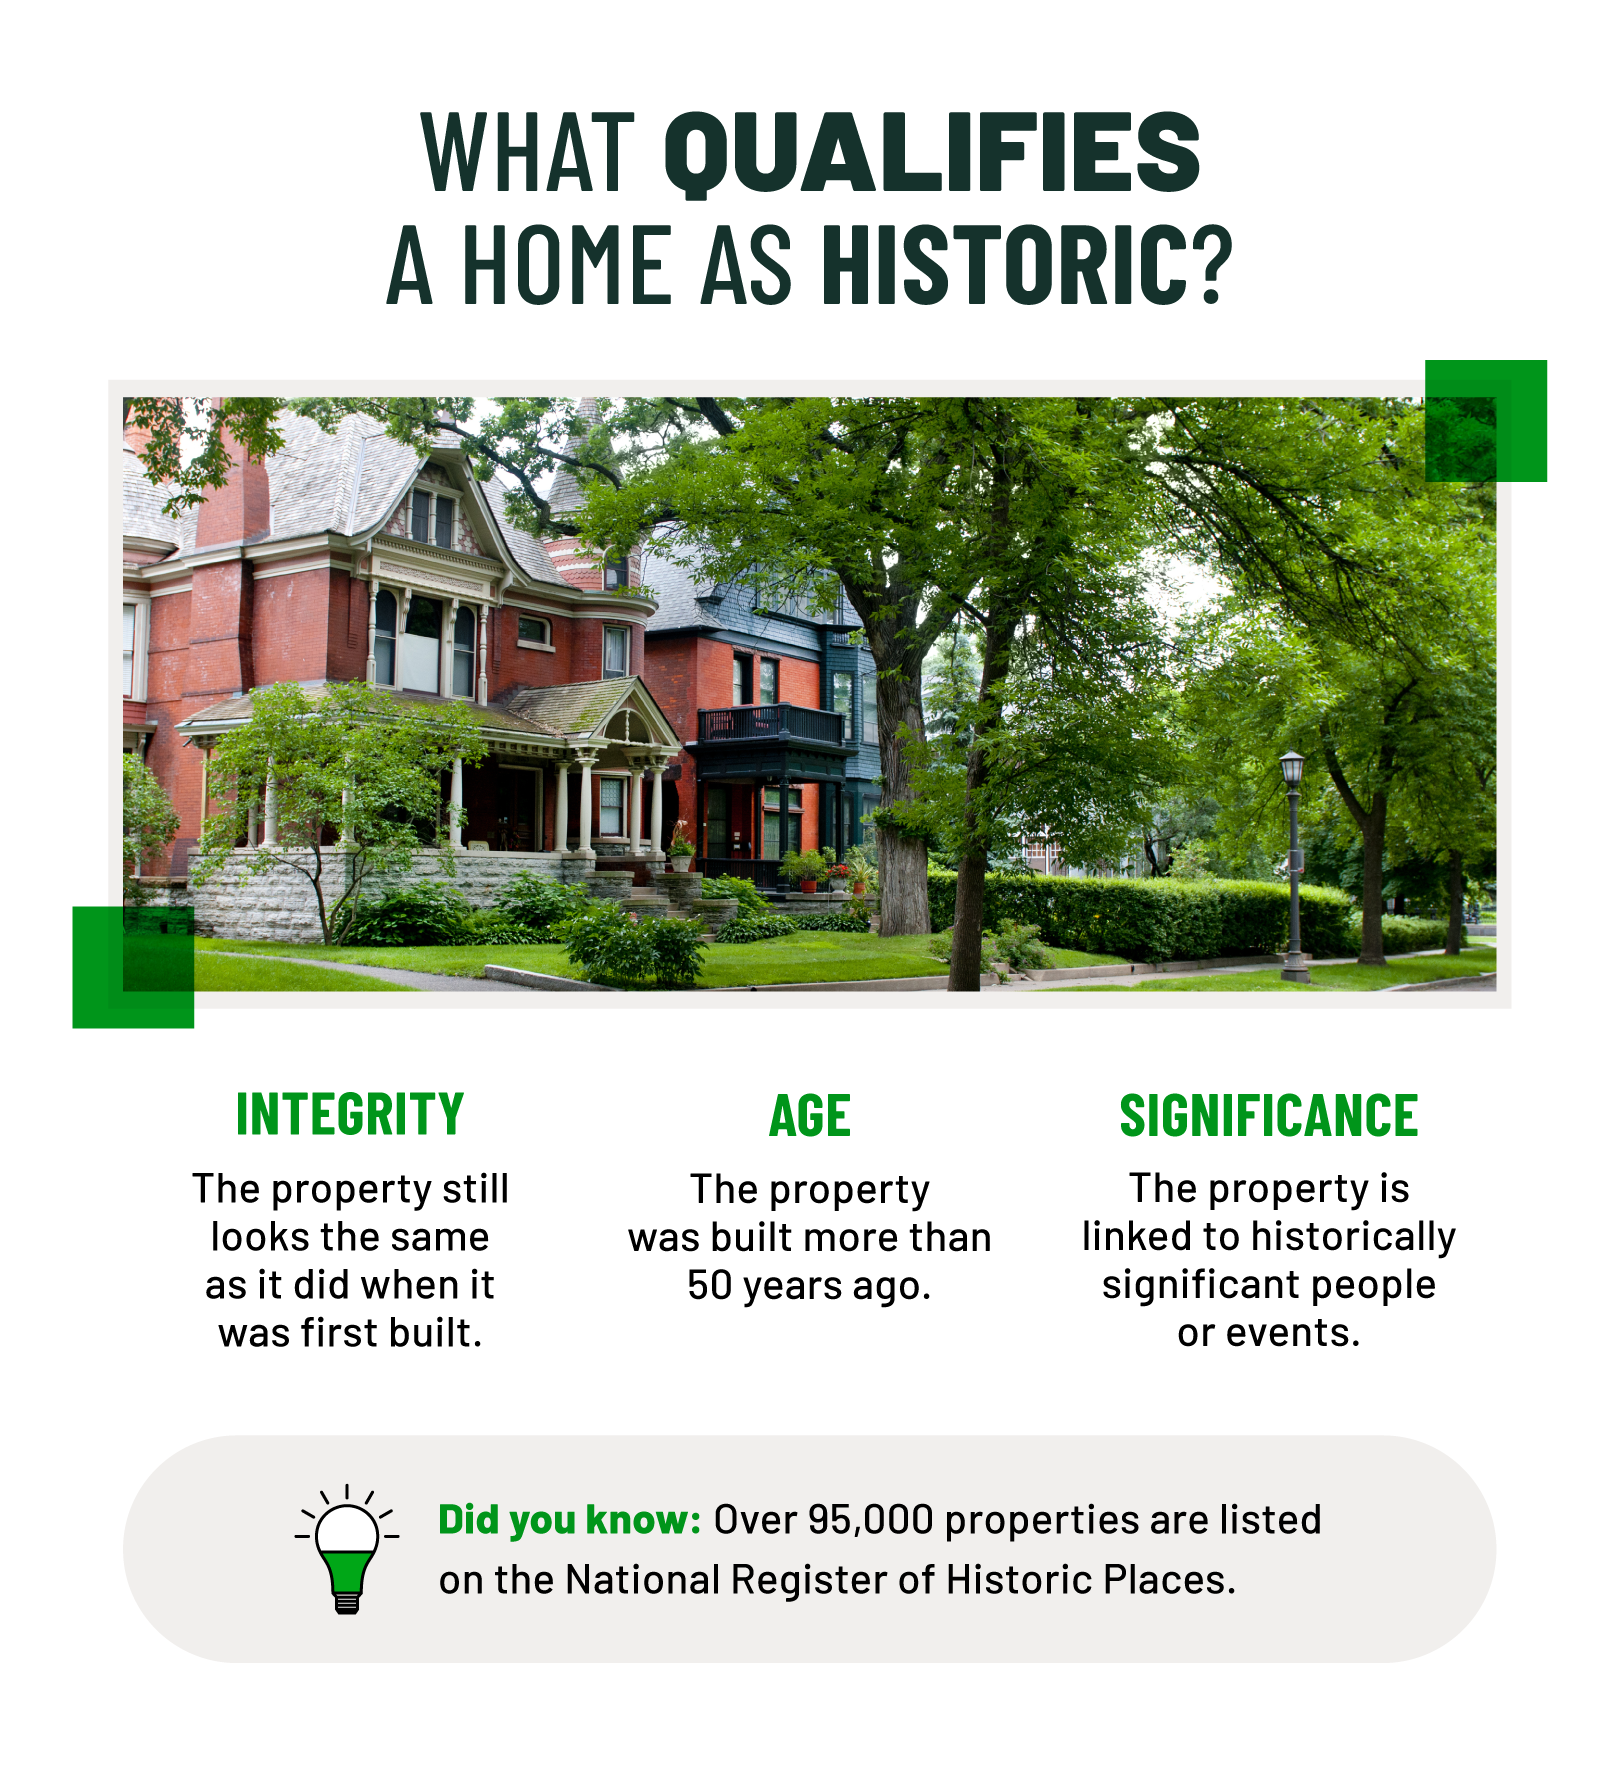 Image of an older home with trees, text around the image explaining what qualifies a home as historic